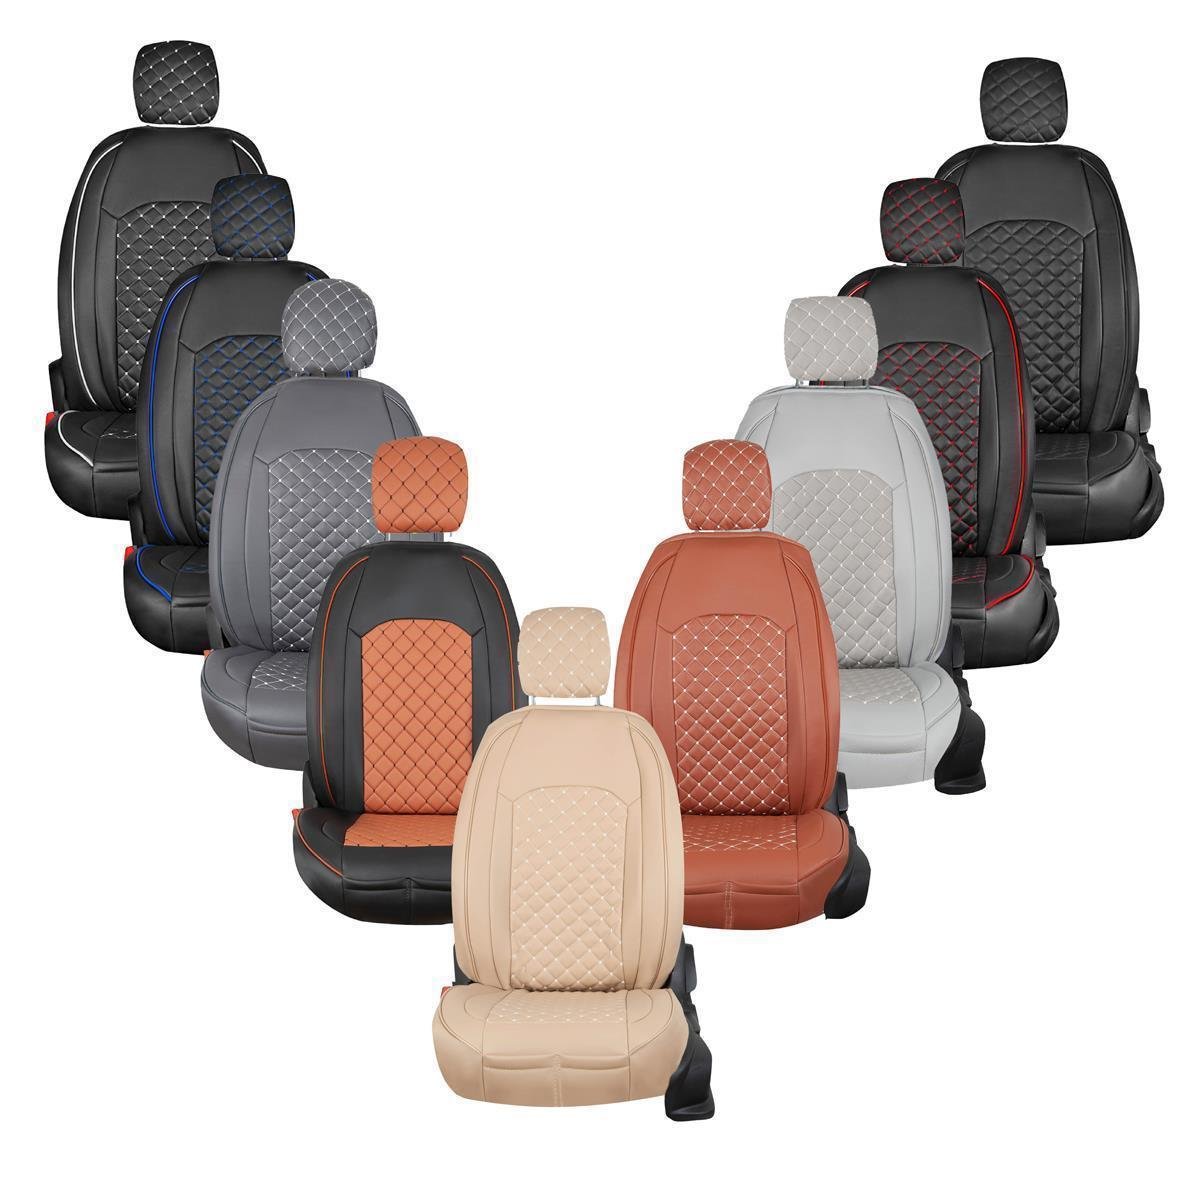 Seat covers for your Kia Ceed - Set New York - Germansell, 169,00 €